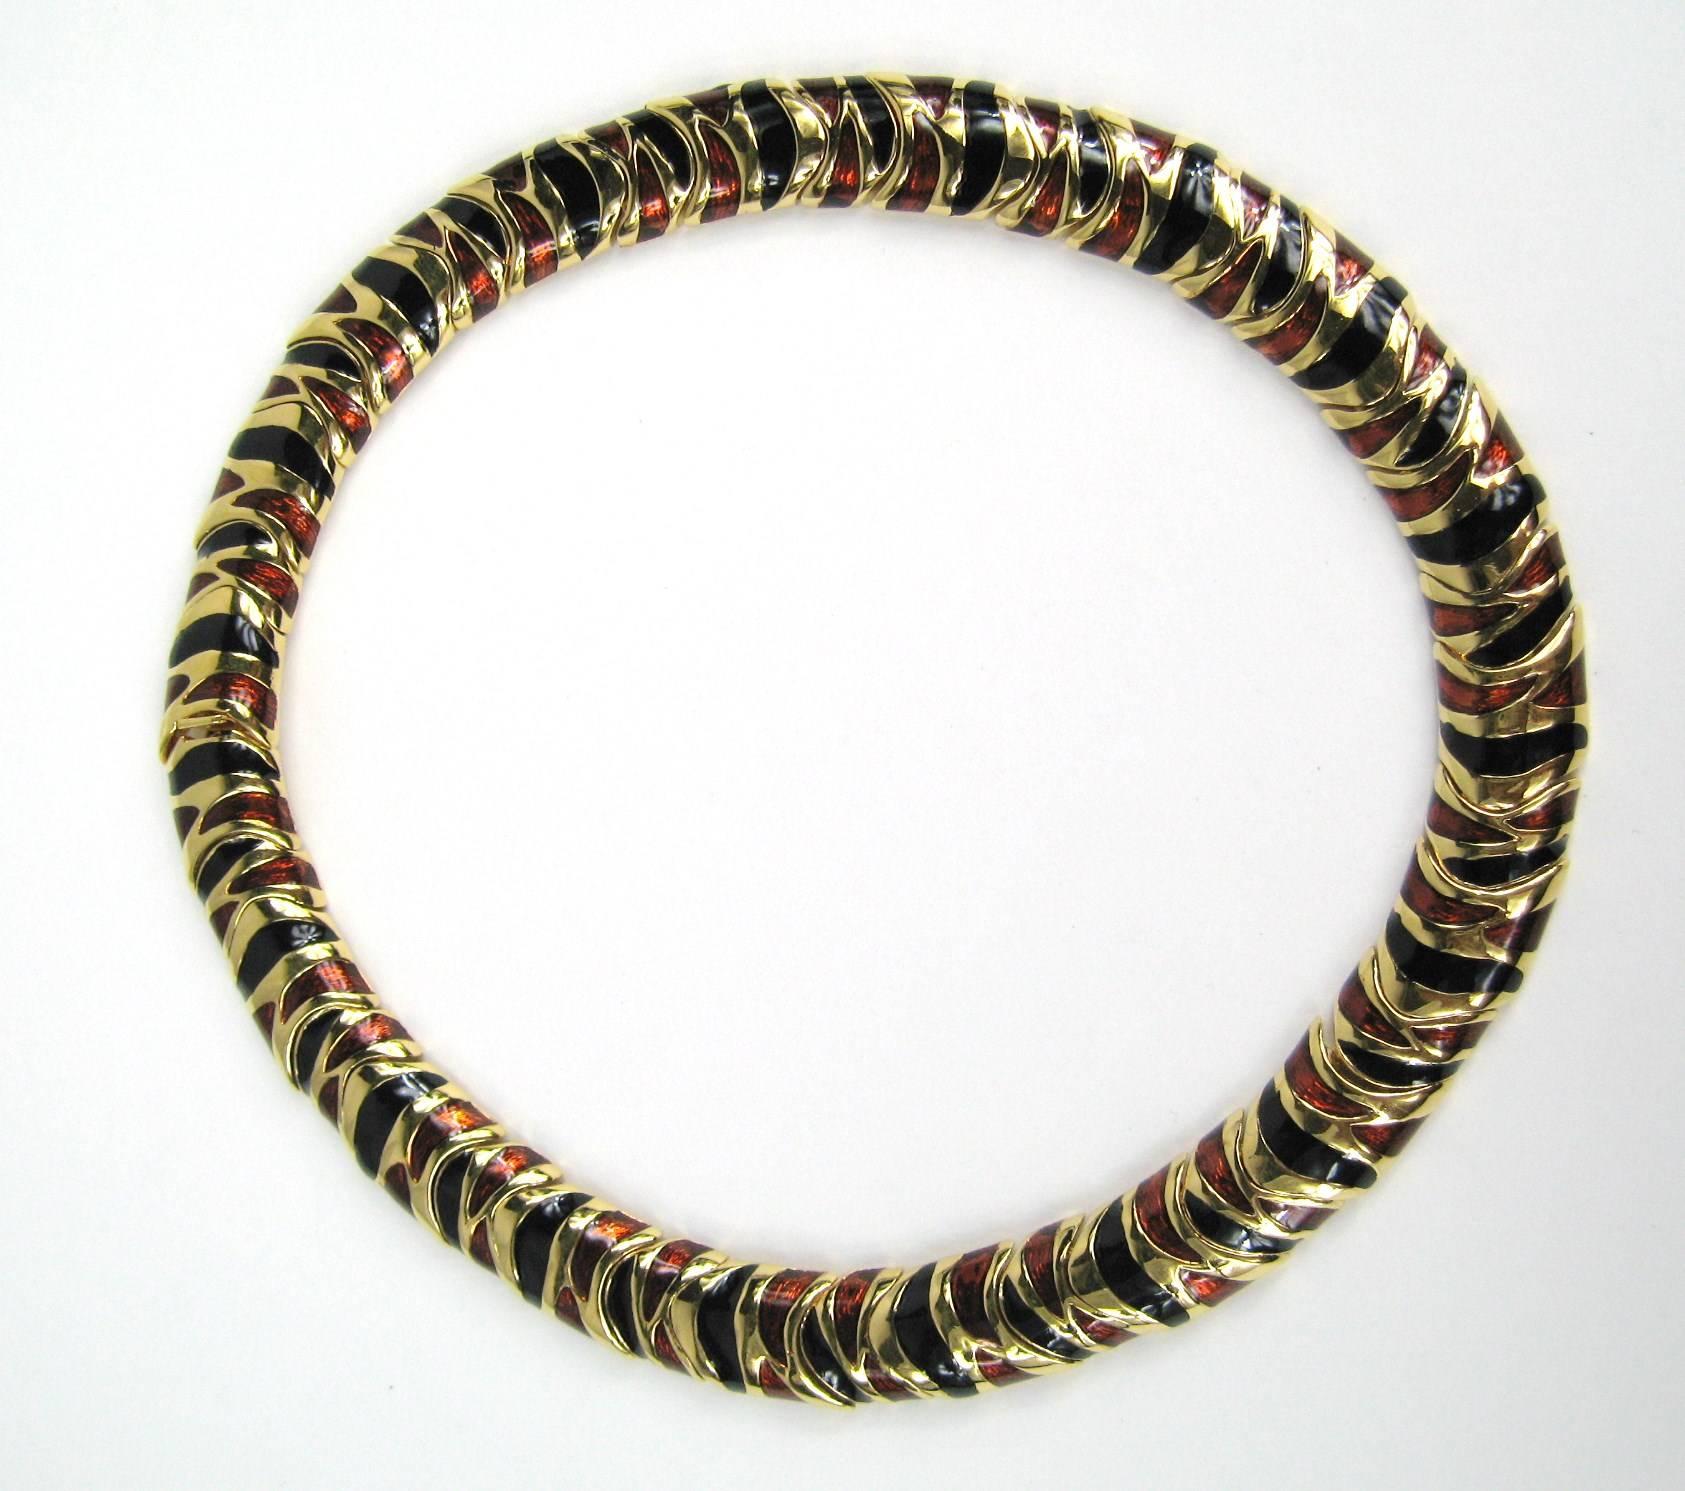 Stunning Ciner Necklace Enameled with bronze reddish and black. Choker size which Measures - .57 inches wide and 14.5in long. We have many New, Never worn Ciner pieces on our storefront. This is out of a massive collection of Jewelry from one